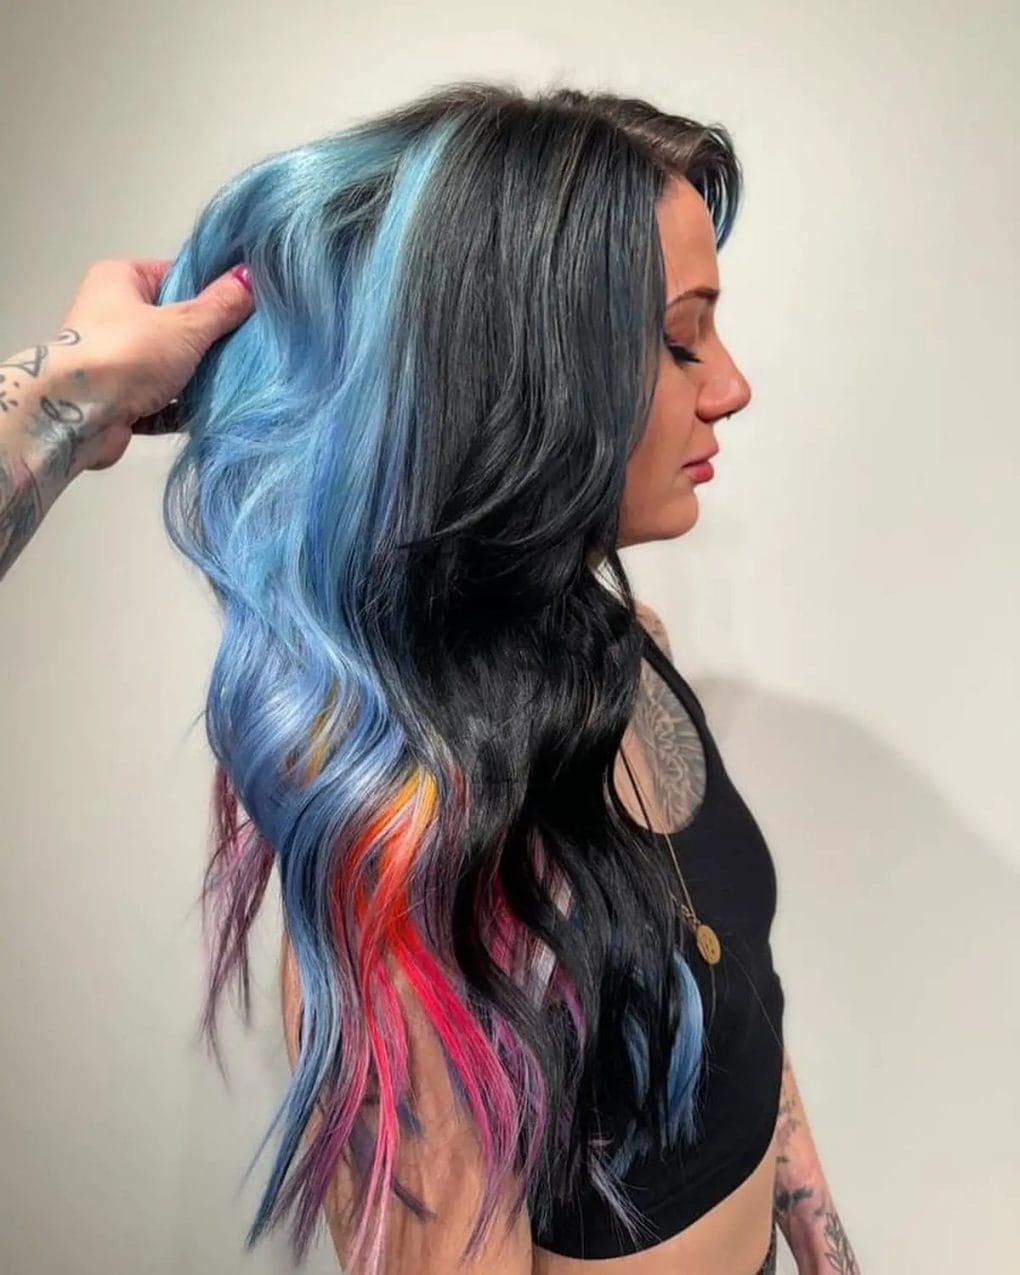 Ocean blue and neon pink splash on long layered waves